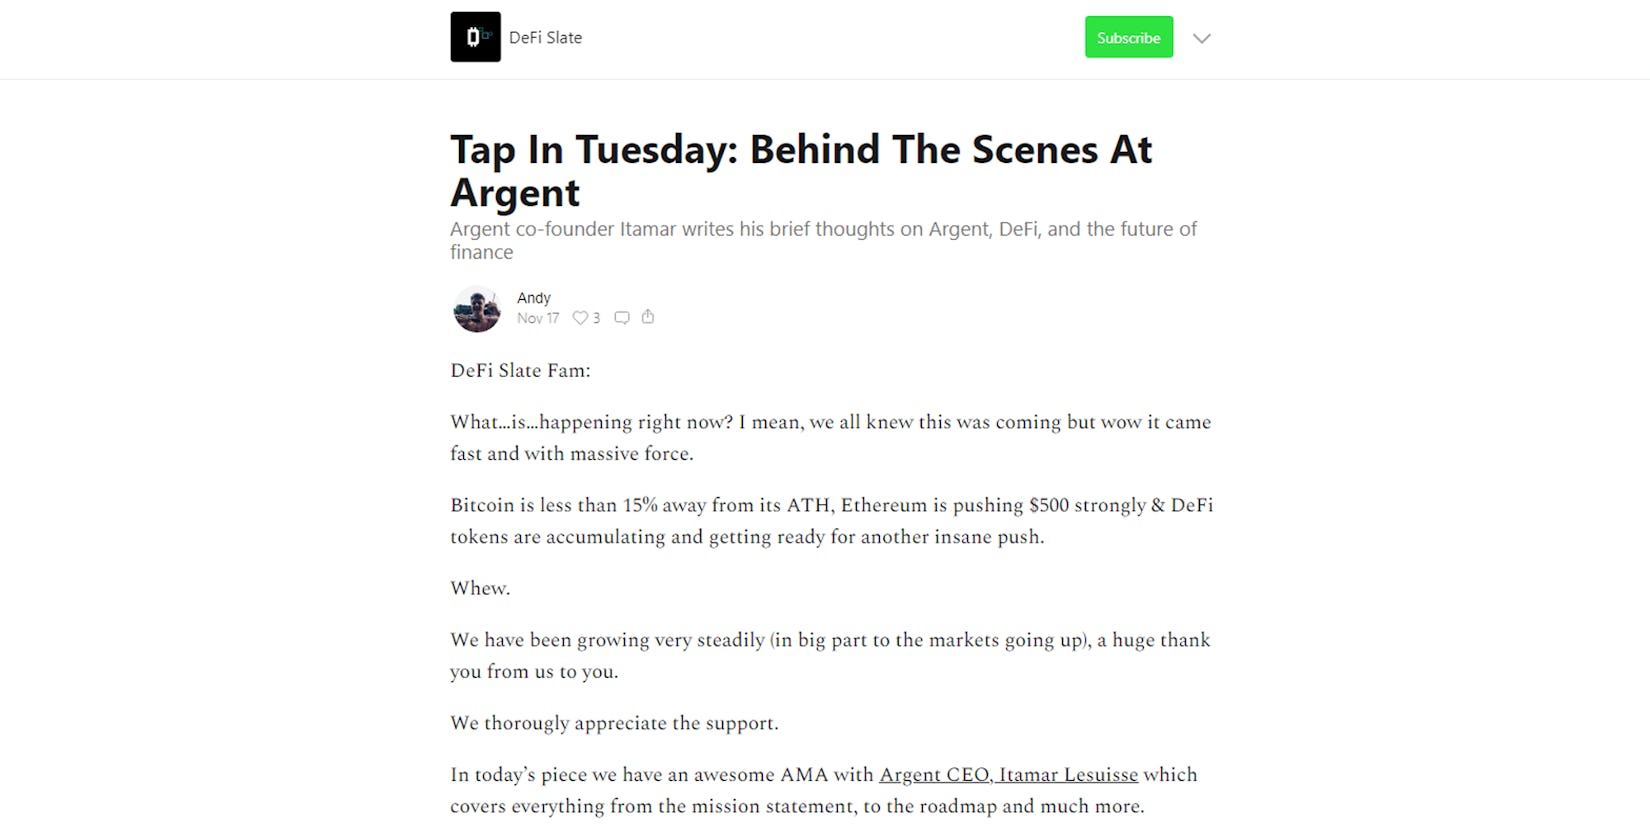 DeFi Slate: Tap In Tuesday - Behind The Scenes At Argent